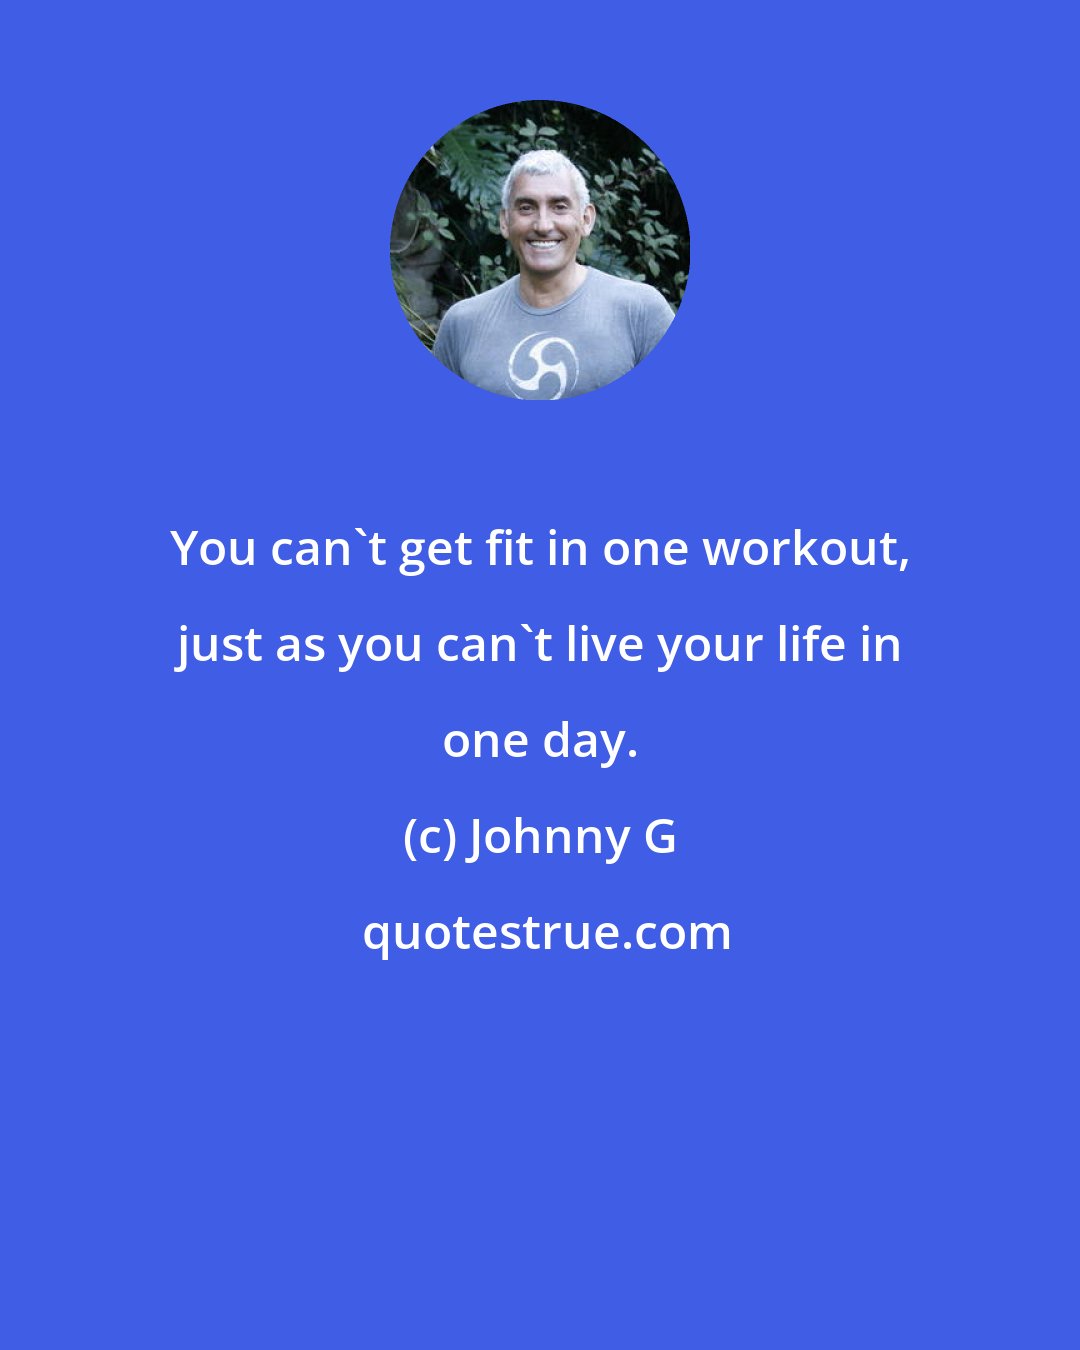 Johnny G: You can't get fit in one workout, just as you can't live your life in one day.